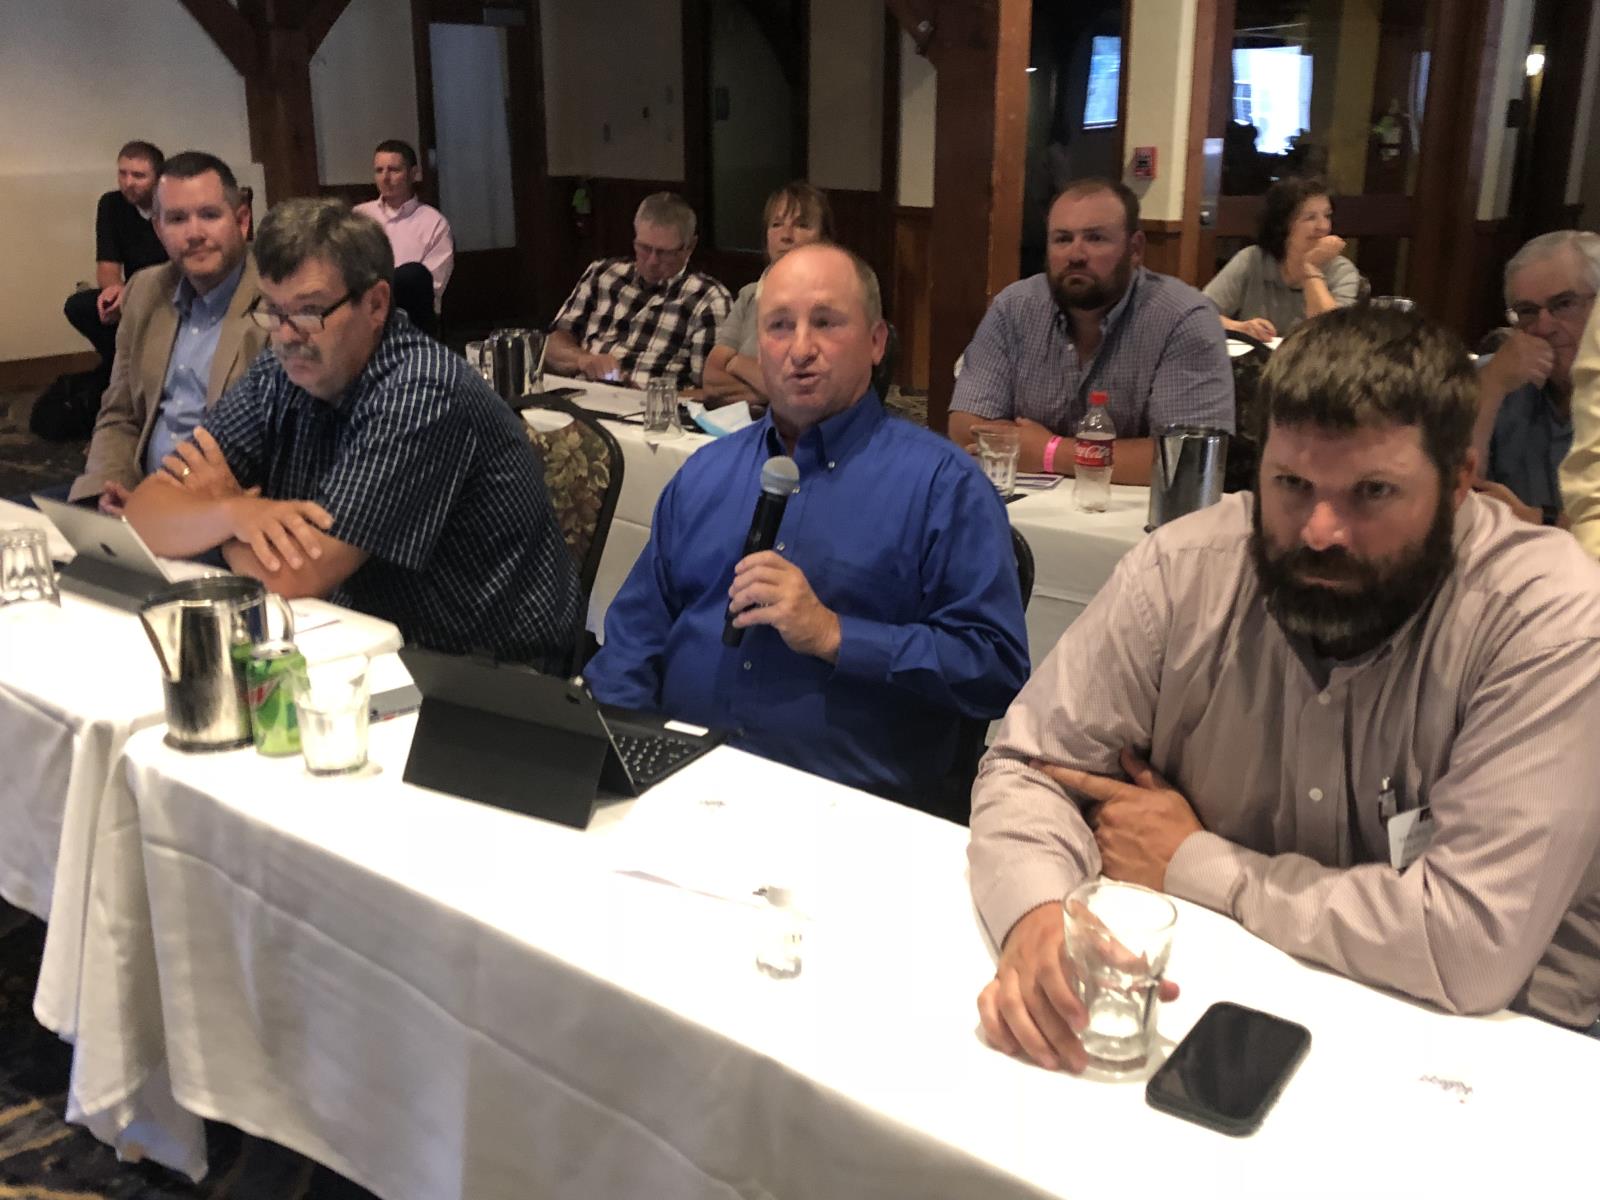 Idaho Farm Bureau Federation Vice President Richard Durrant makes a point during IFBF’s annual County Presidents Summer Conference, which was held July 21-22 in Kellogg.